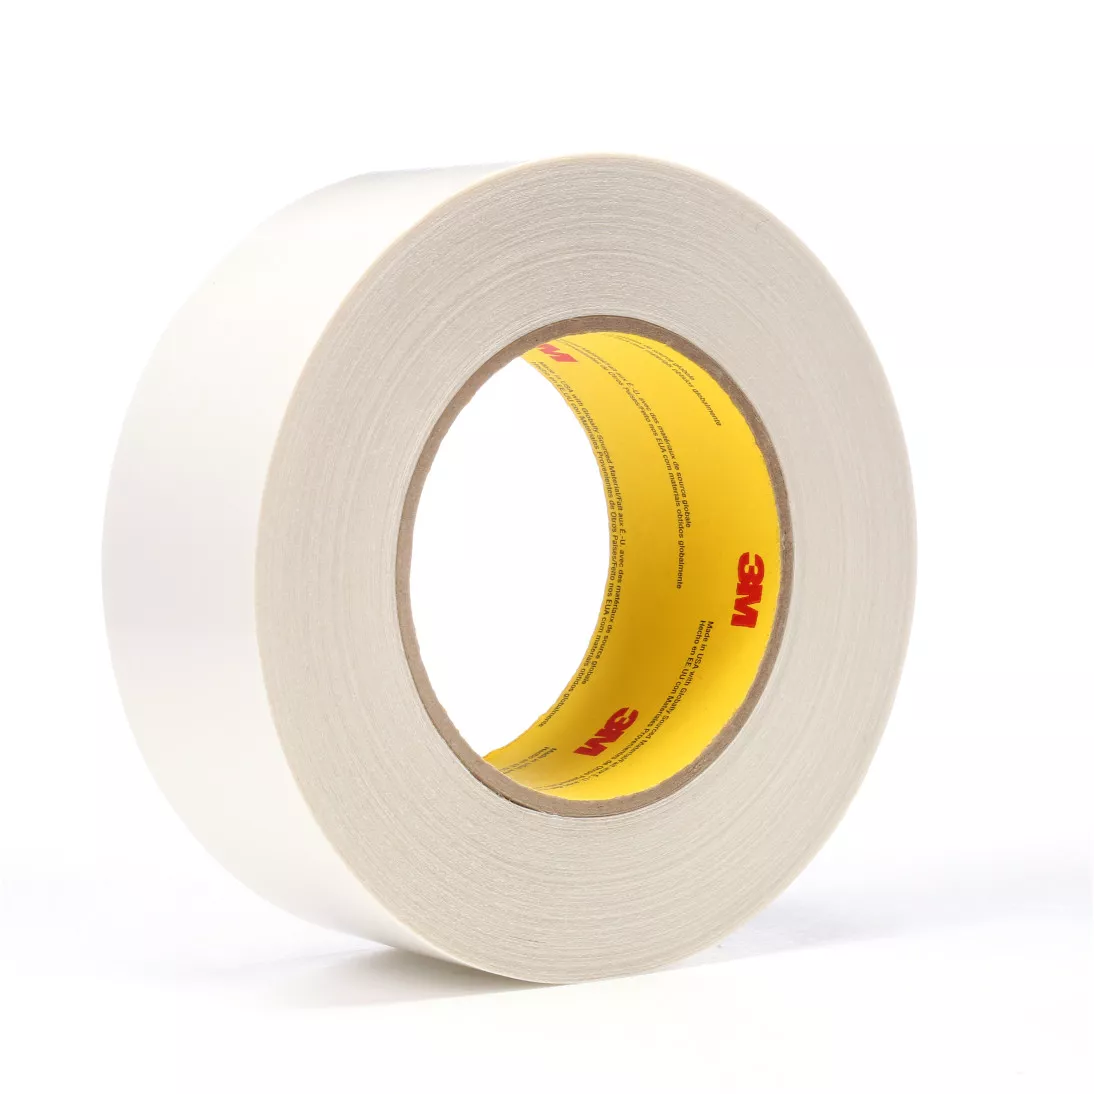 3M™ Double Coated Tape 9737, Clear, 48 mm x 55 m, 3.5 mil, 24 rolls per
case